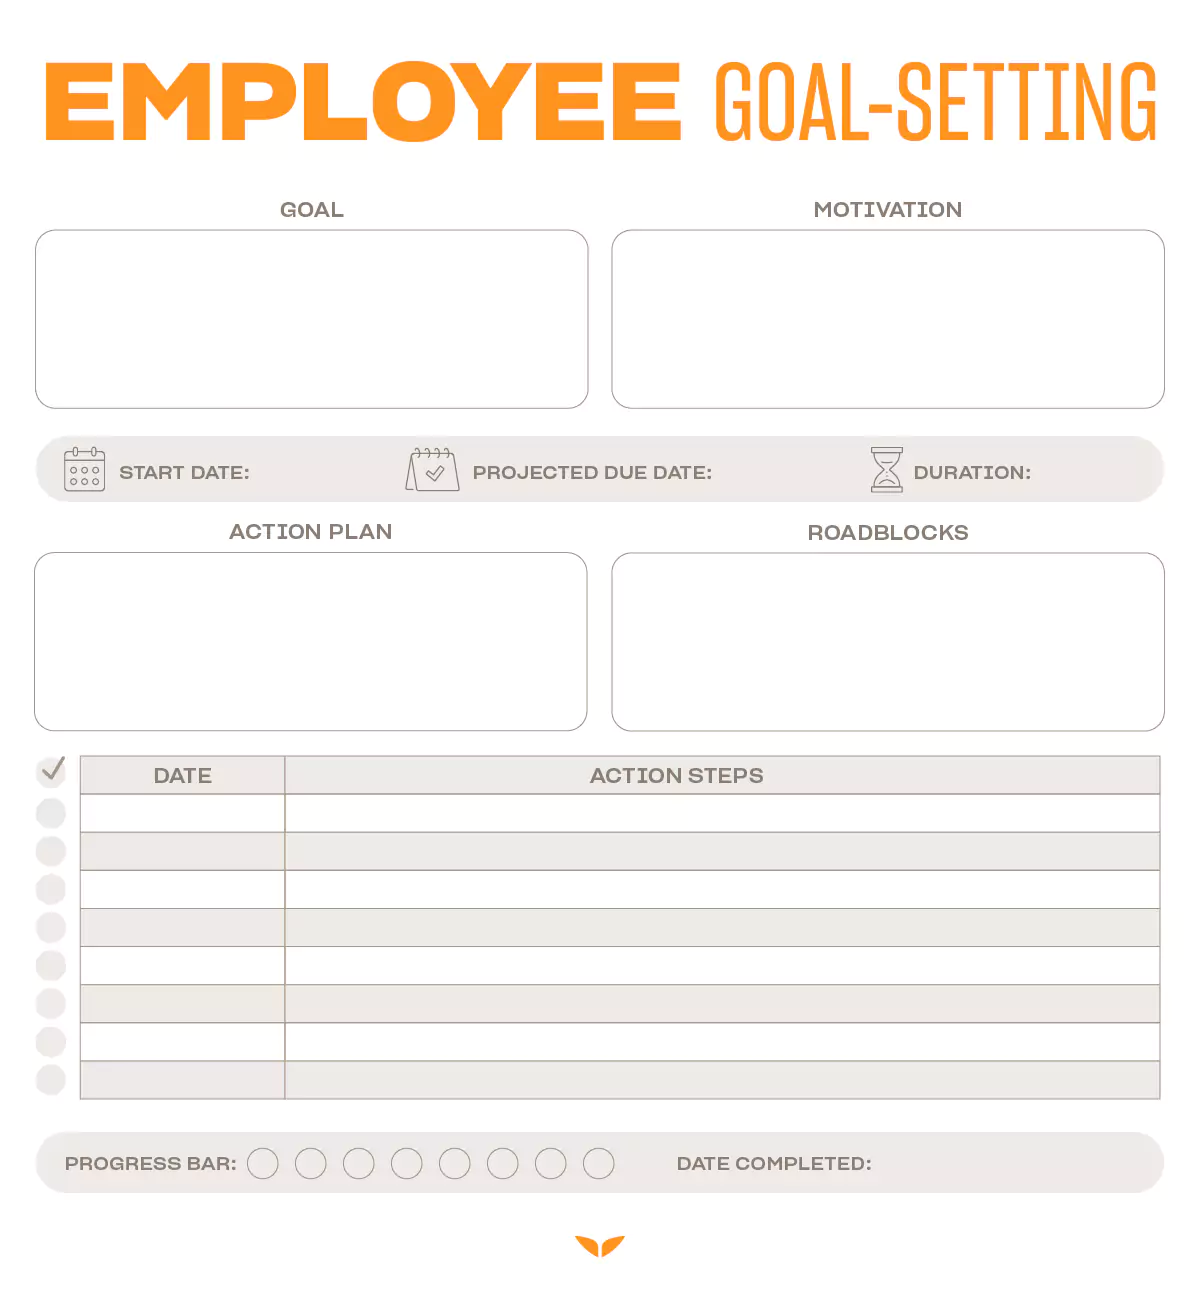 Goal-setting template for employees